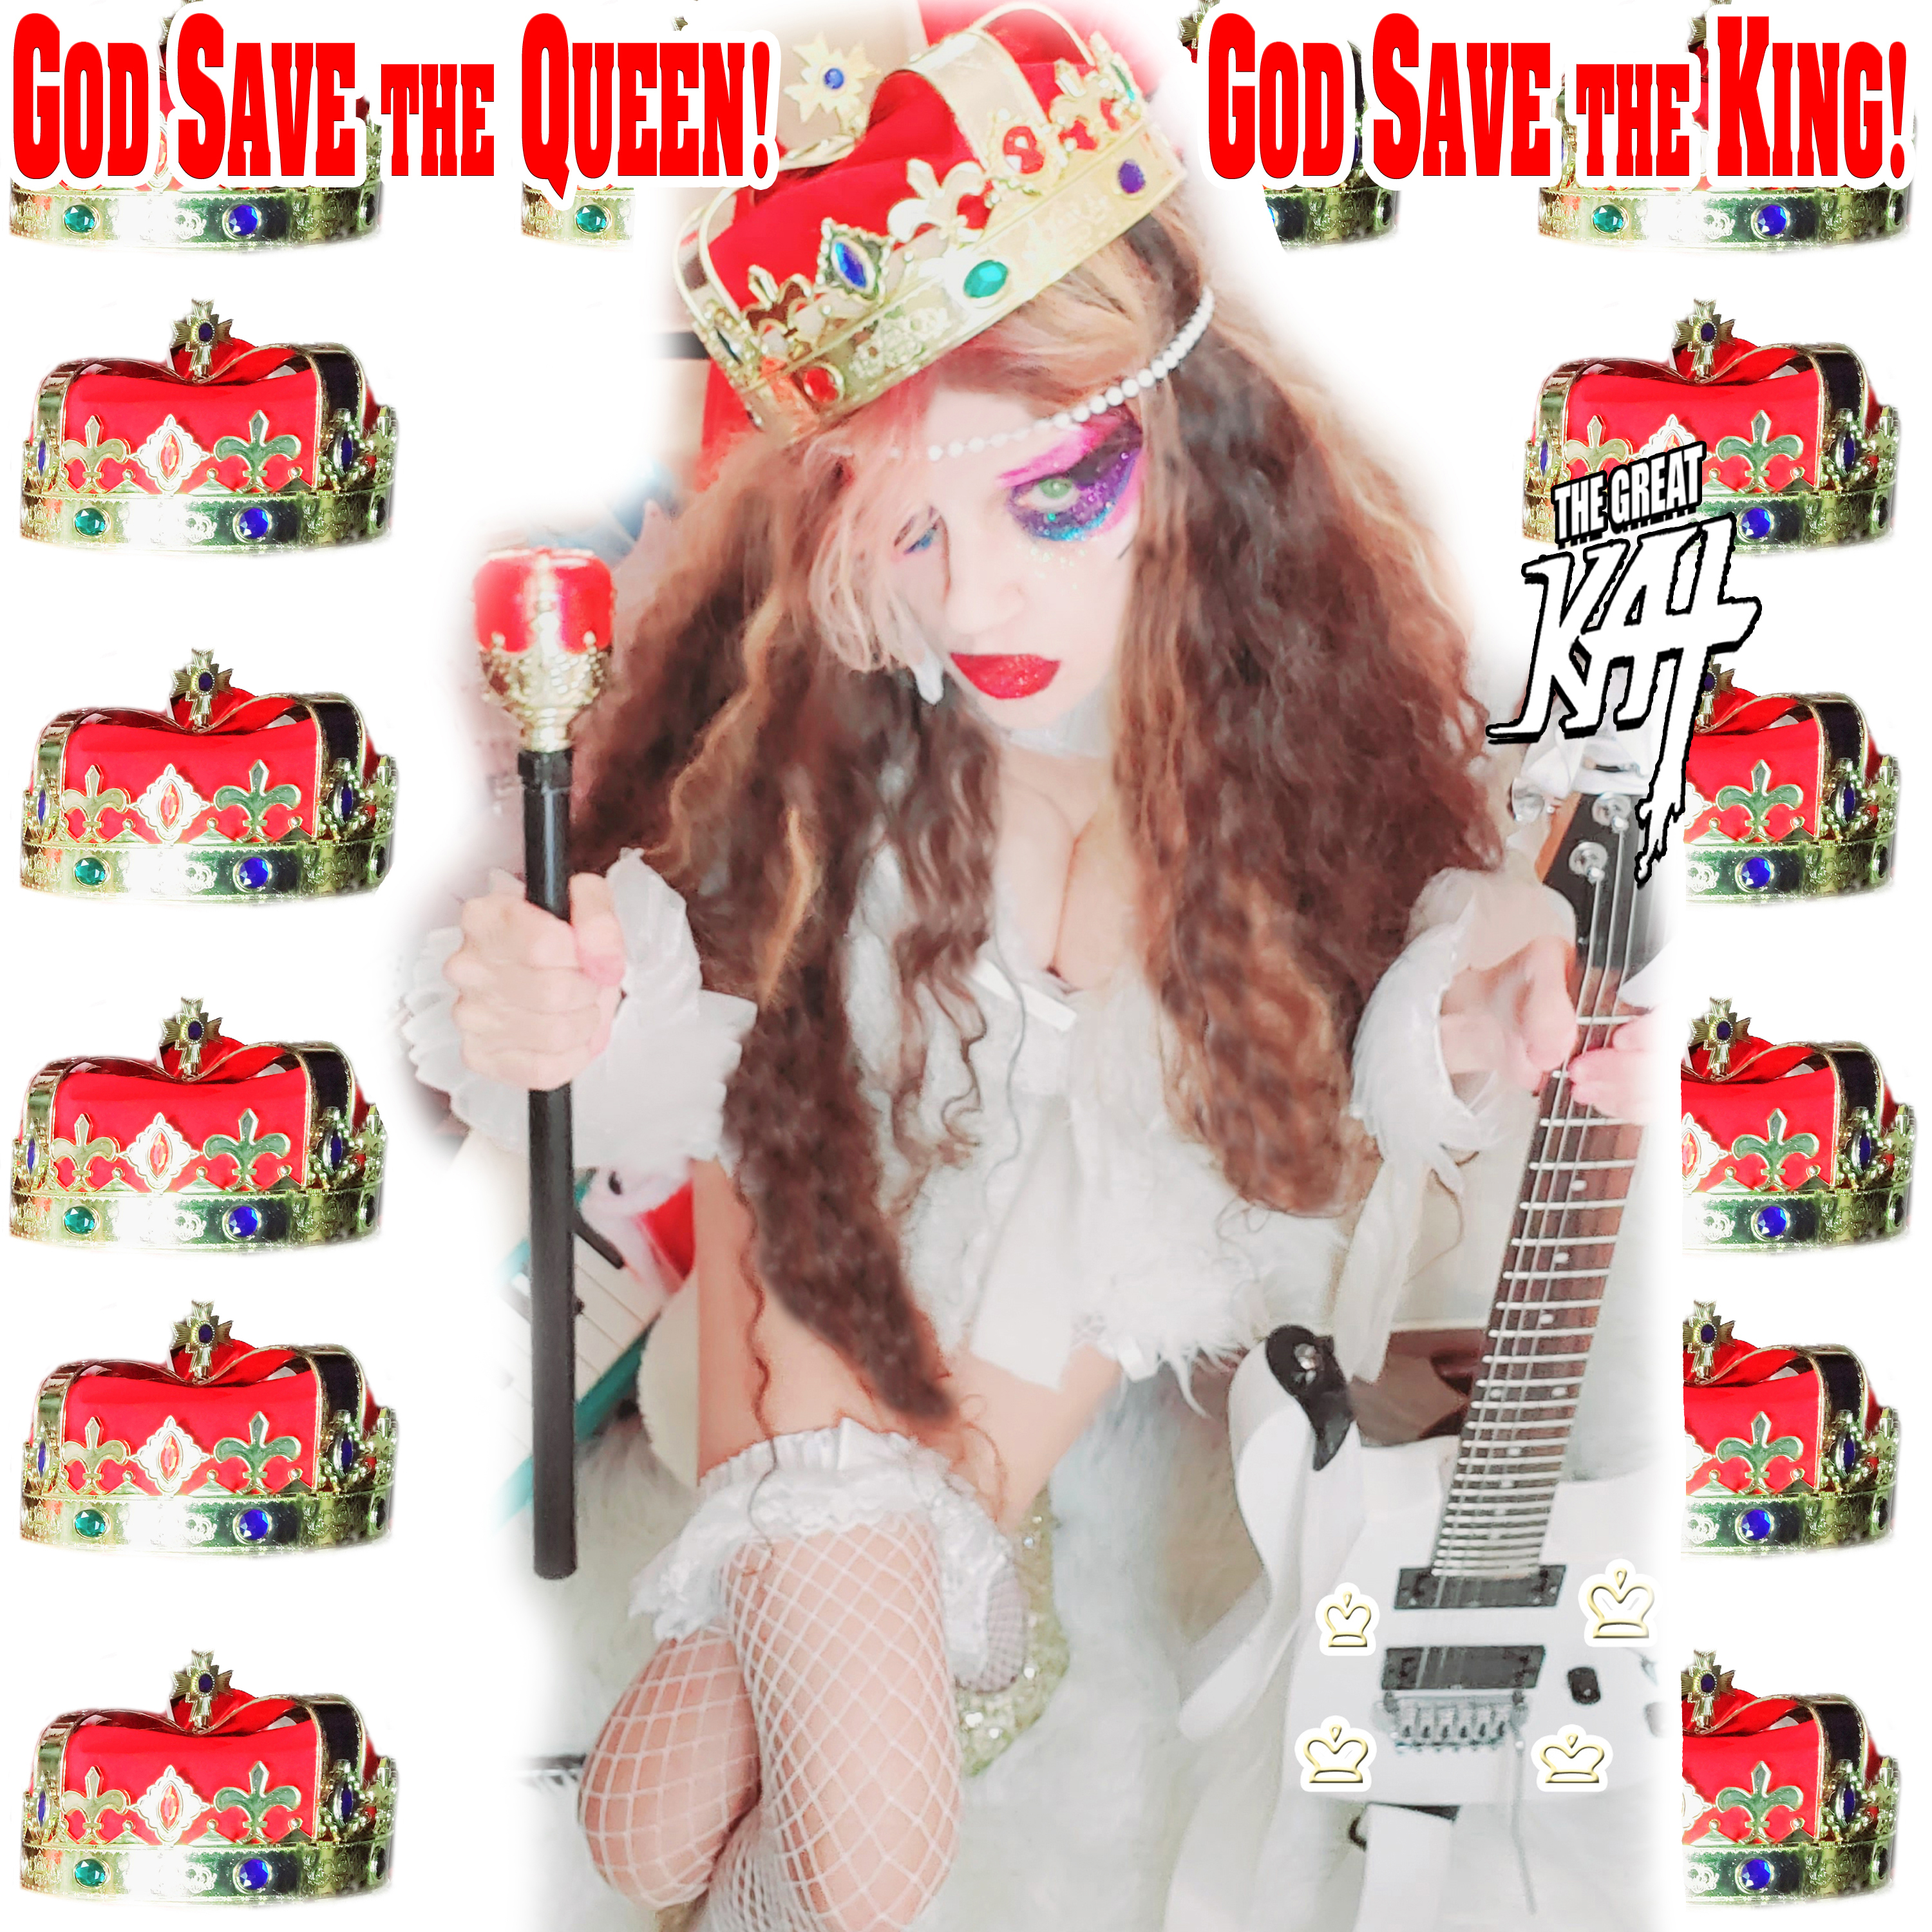 NEW �GOD SAVE THE QUEEN! GOD SAVE THE KING!� 9-Song CD Album (12 Min) by THE GREAT KAT! PERSONALIZED AUTOGRAPHED by THE GREAT KAT to Customer! With "God Save The Queen Guitar" & MORE! http://store10552072.company.site/shared-products/493485599